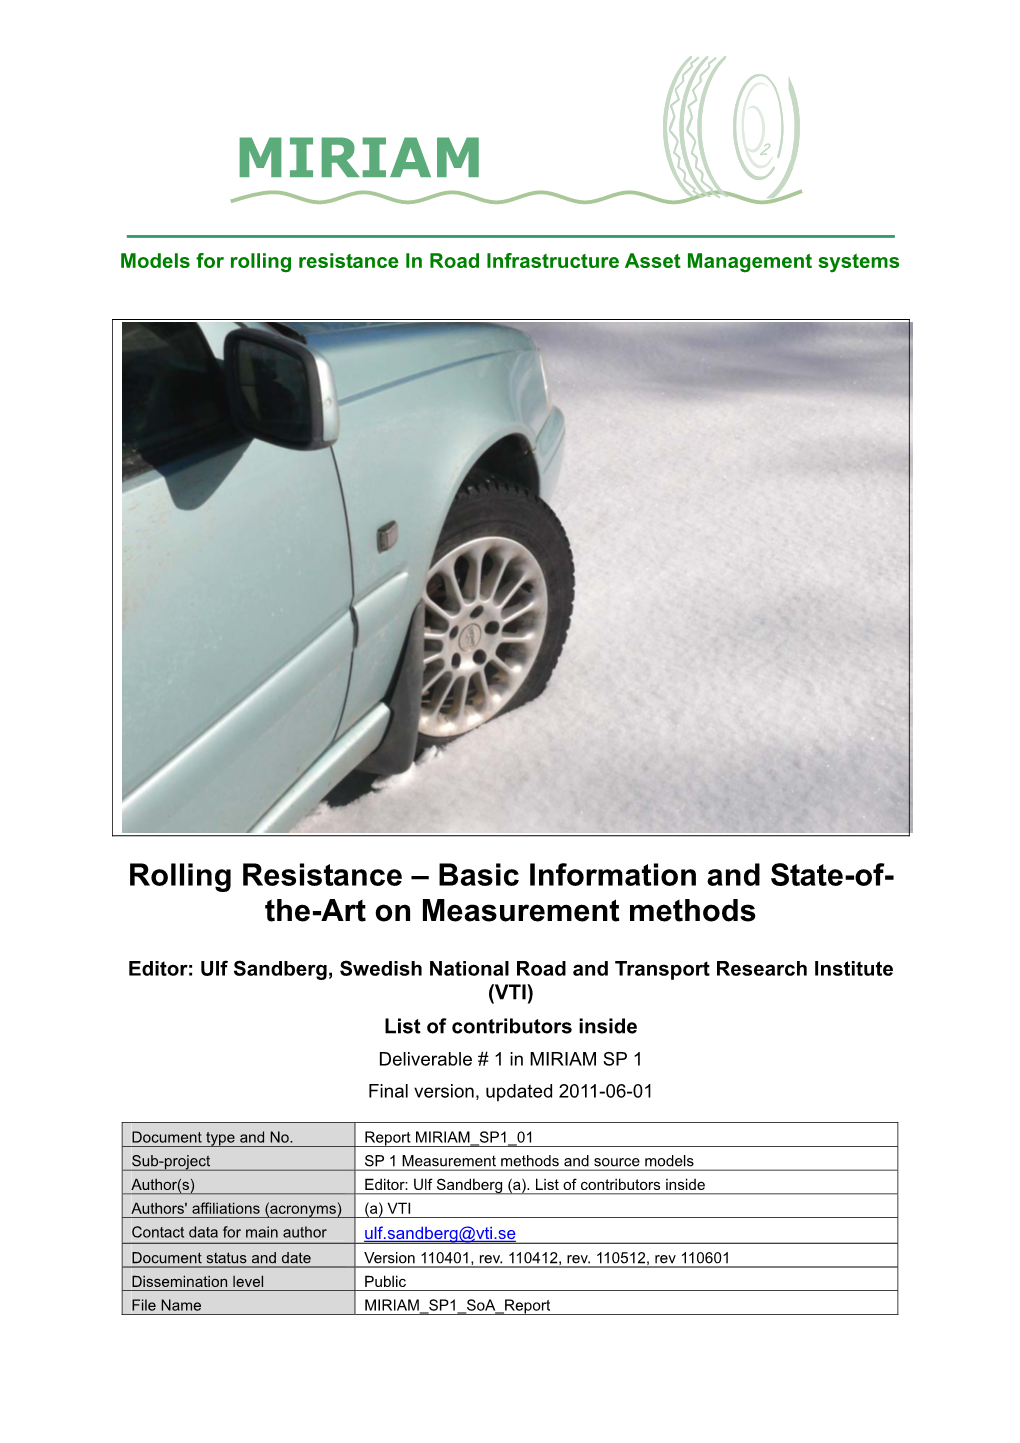 Rolling Resistance in Road Infrastructure Asset Management Systems